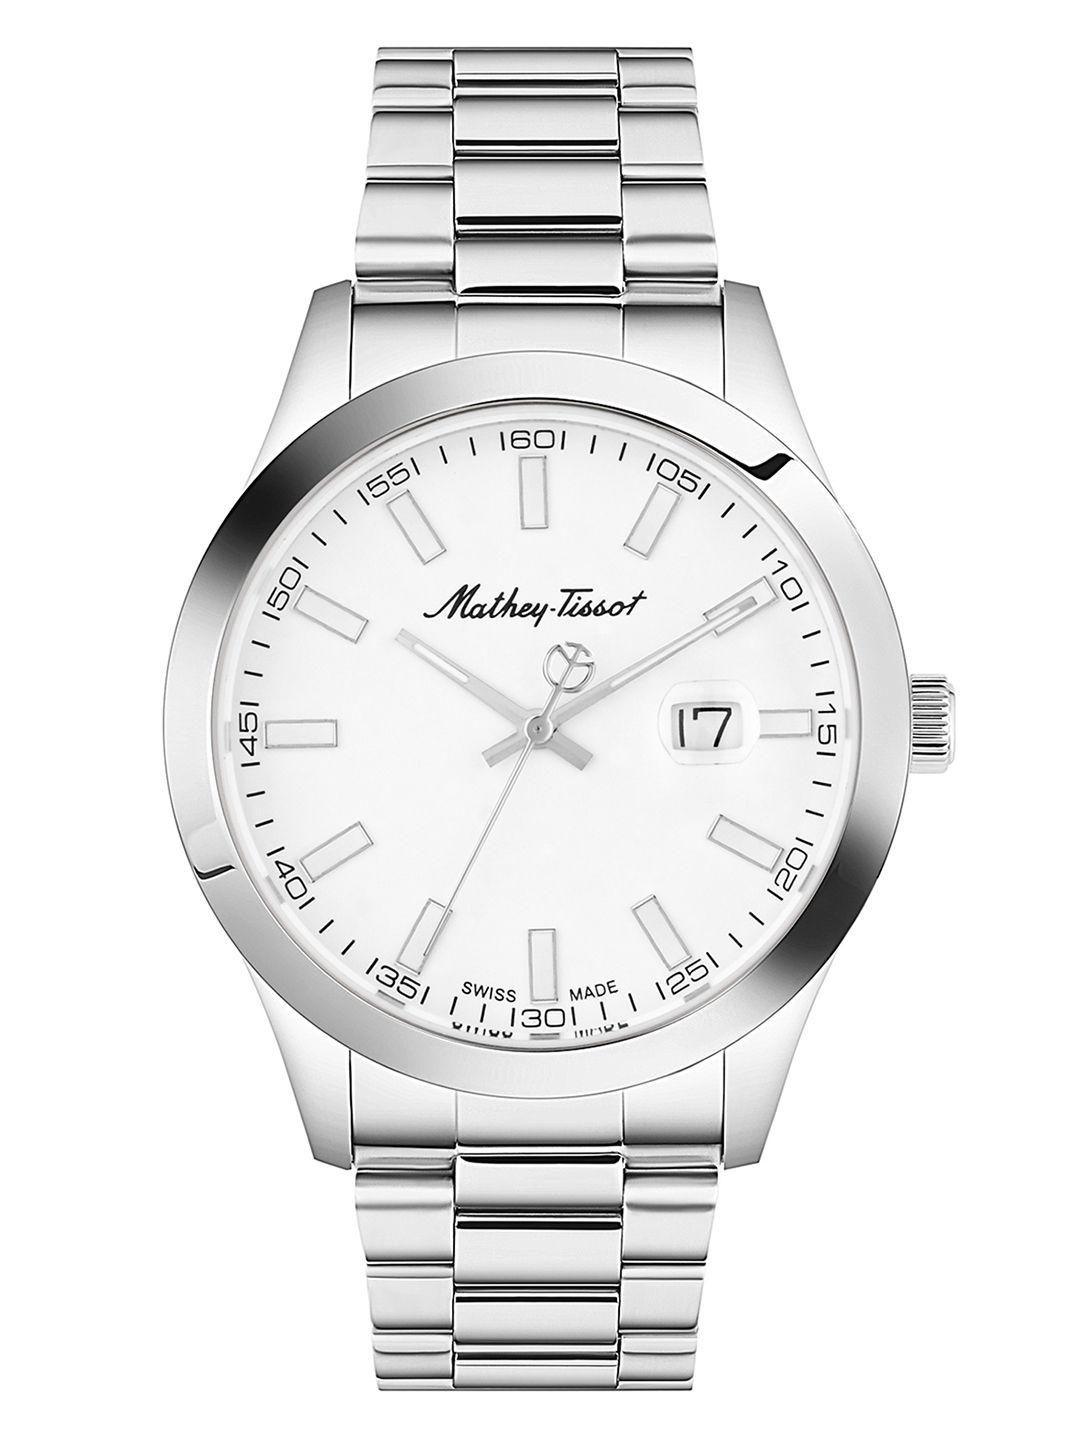 mathey-tissot-swiss-made-men-rolly-i-white-dial-watch-h450ai